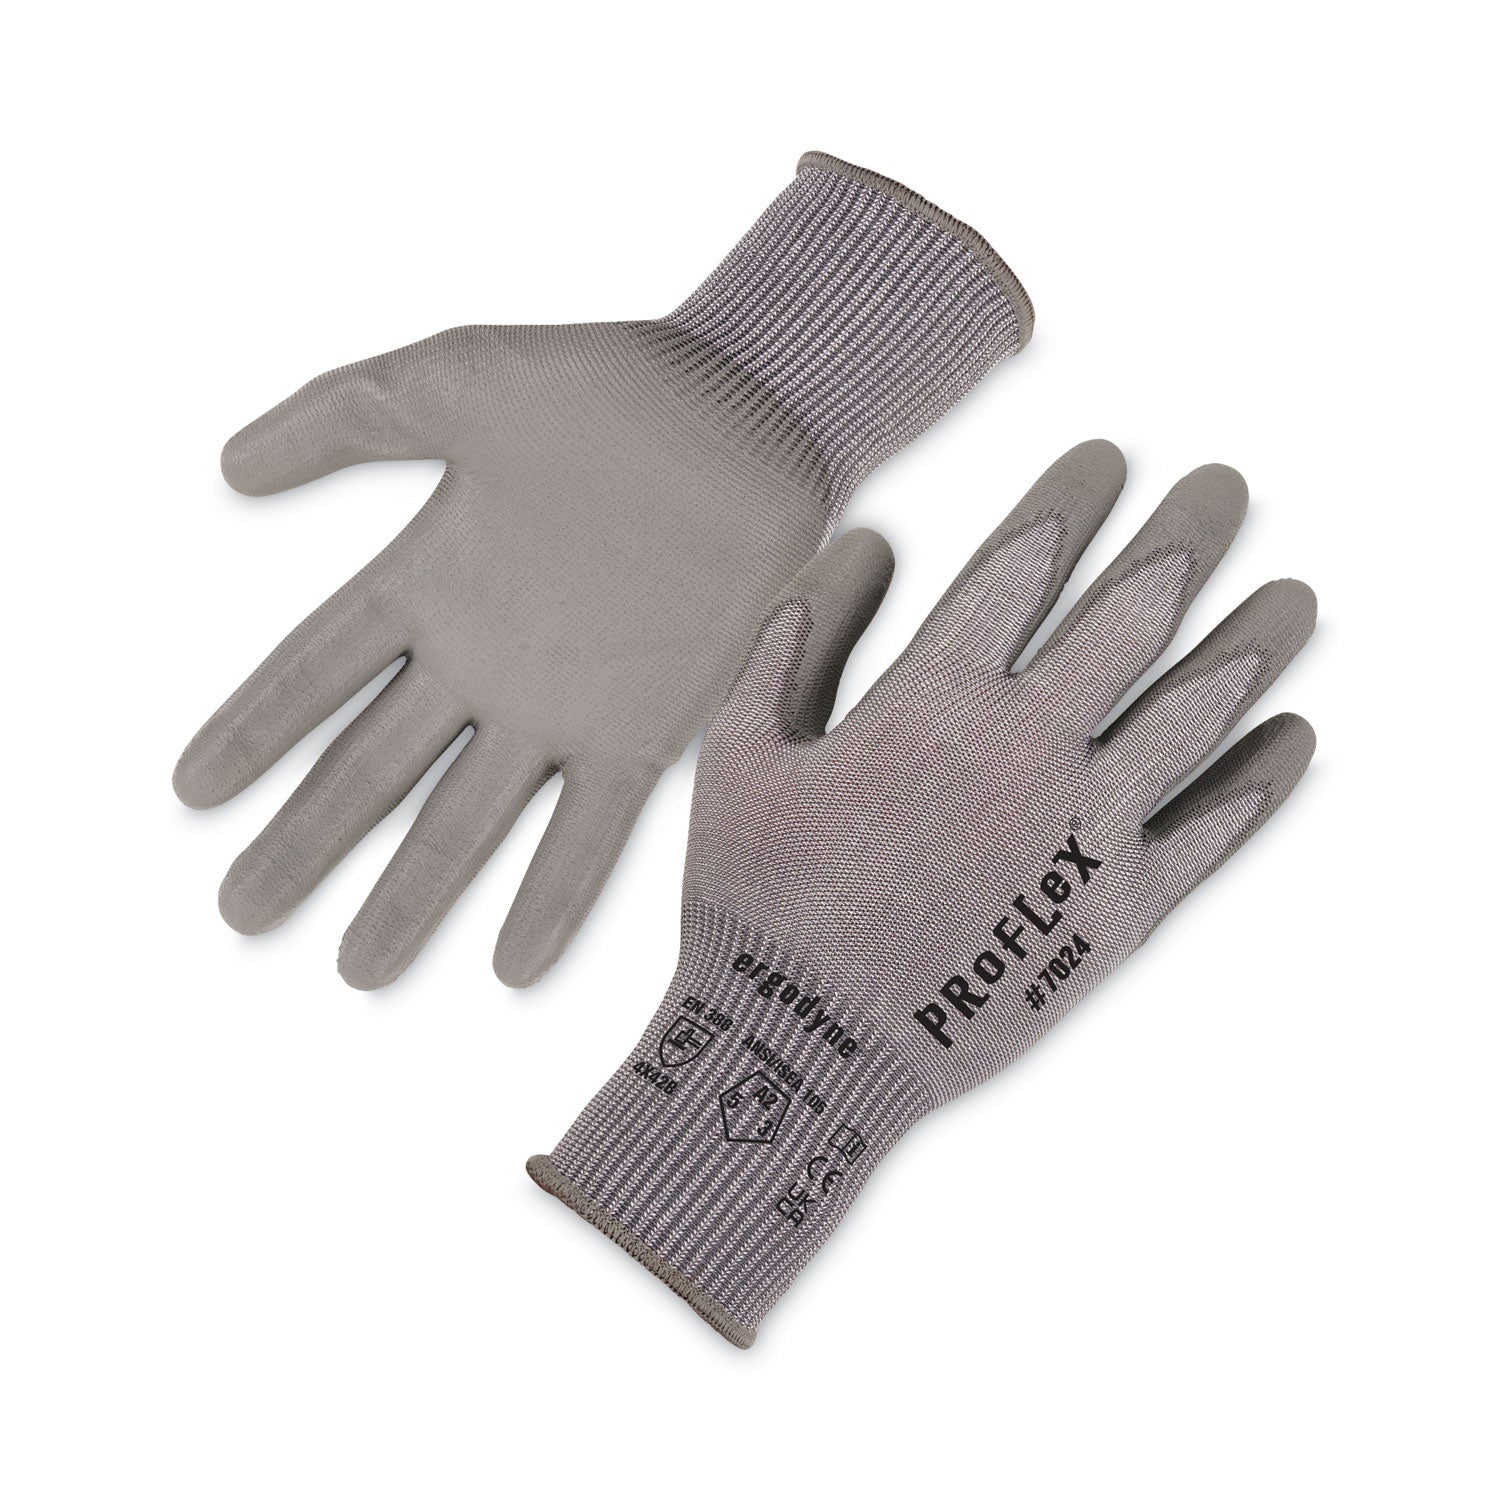 proflex-7024-ansi-a2-pu-coated-cr-gloves-gray-small-pair-ships-in-1-3-business-days_ego10402 - 1